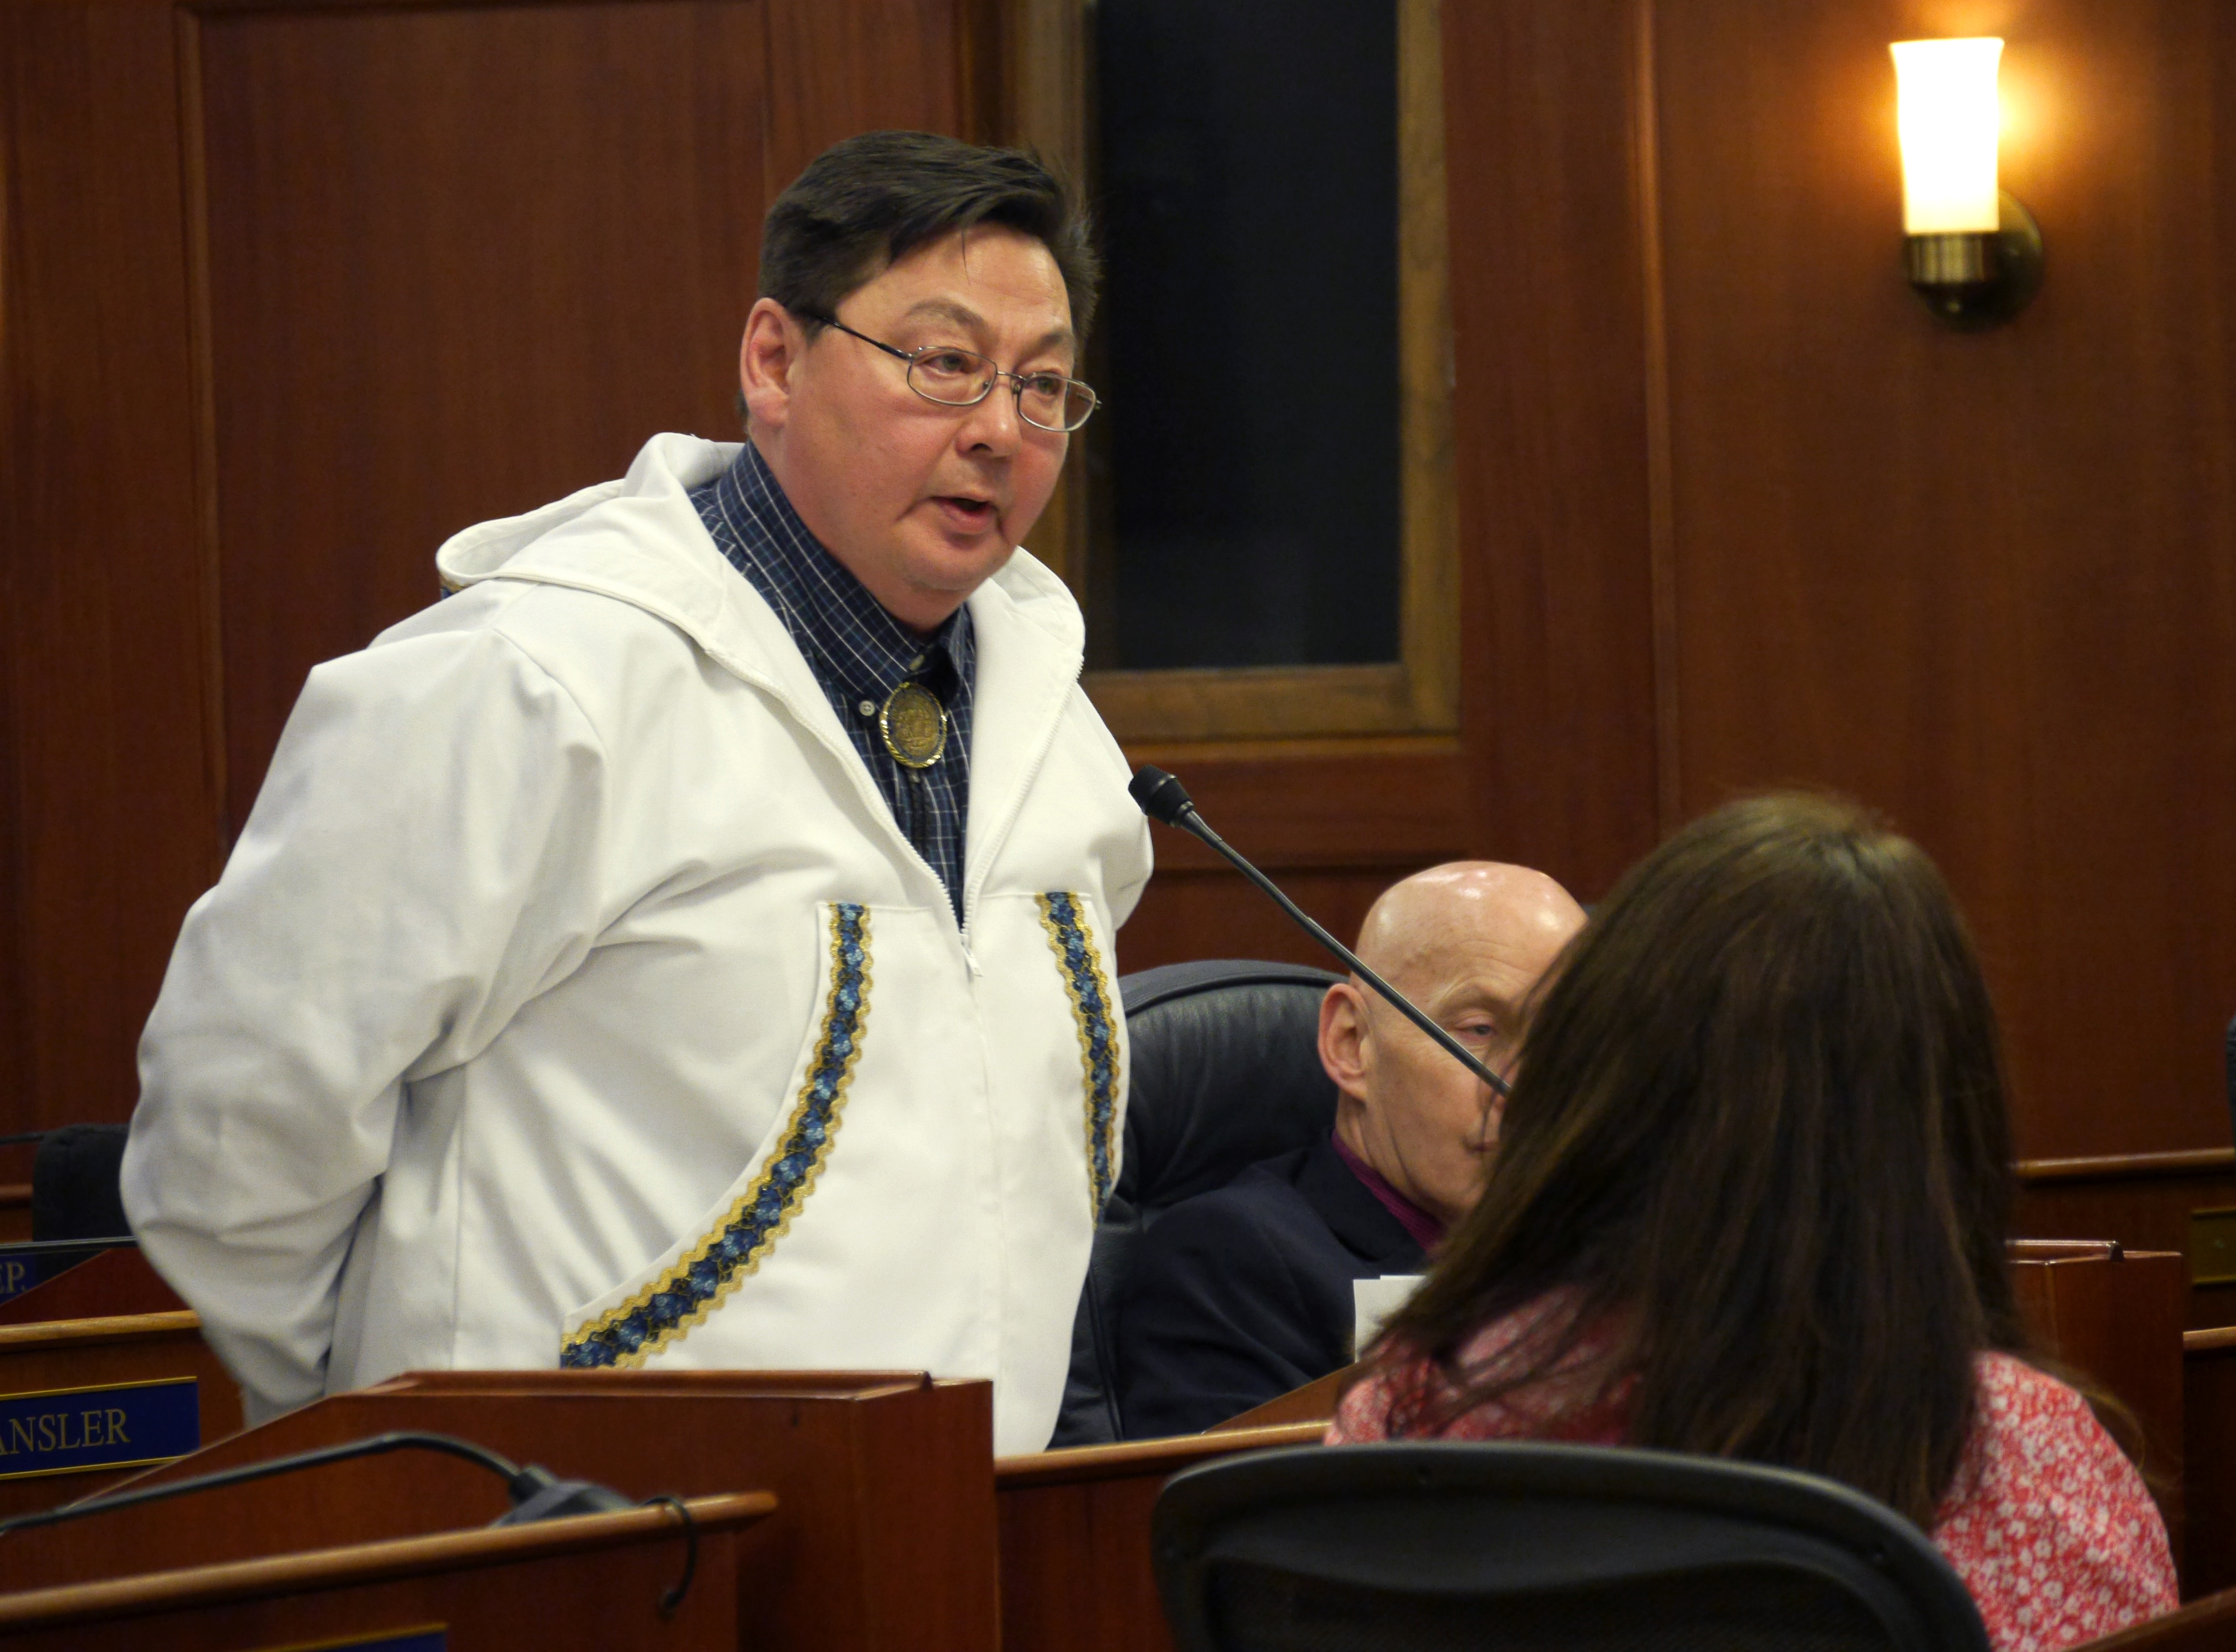 Rep. Dean Westlake, D-Kotzebue, speaks in support of House Bill 78, during a House Floor Session on Feb 3, 2017. (Photo by Skip Gray/360 North)